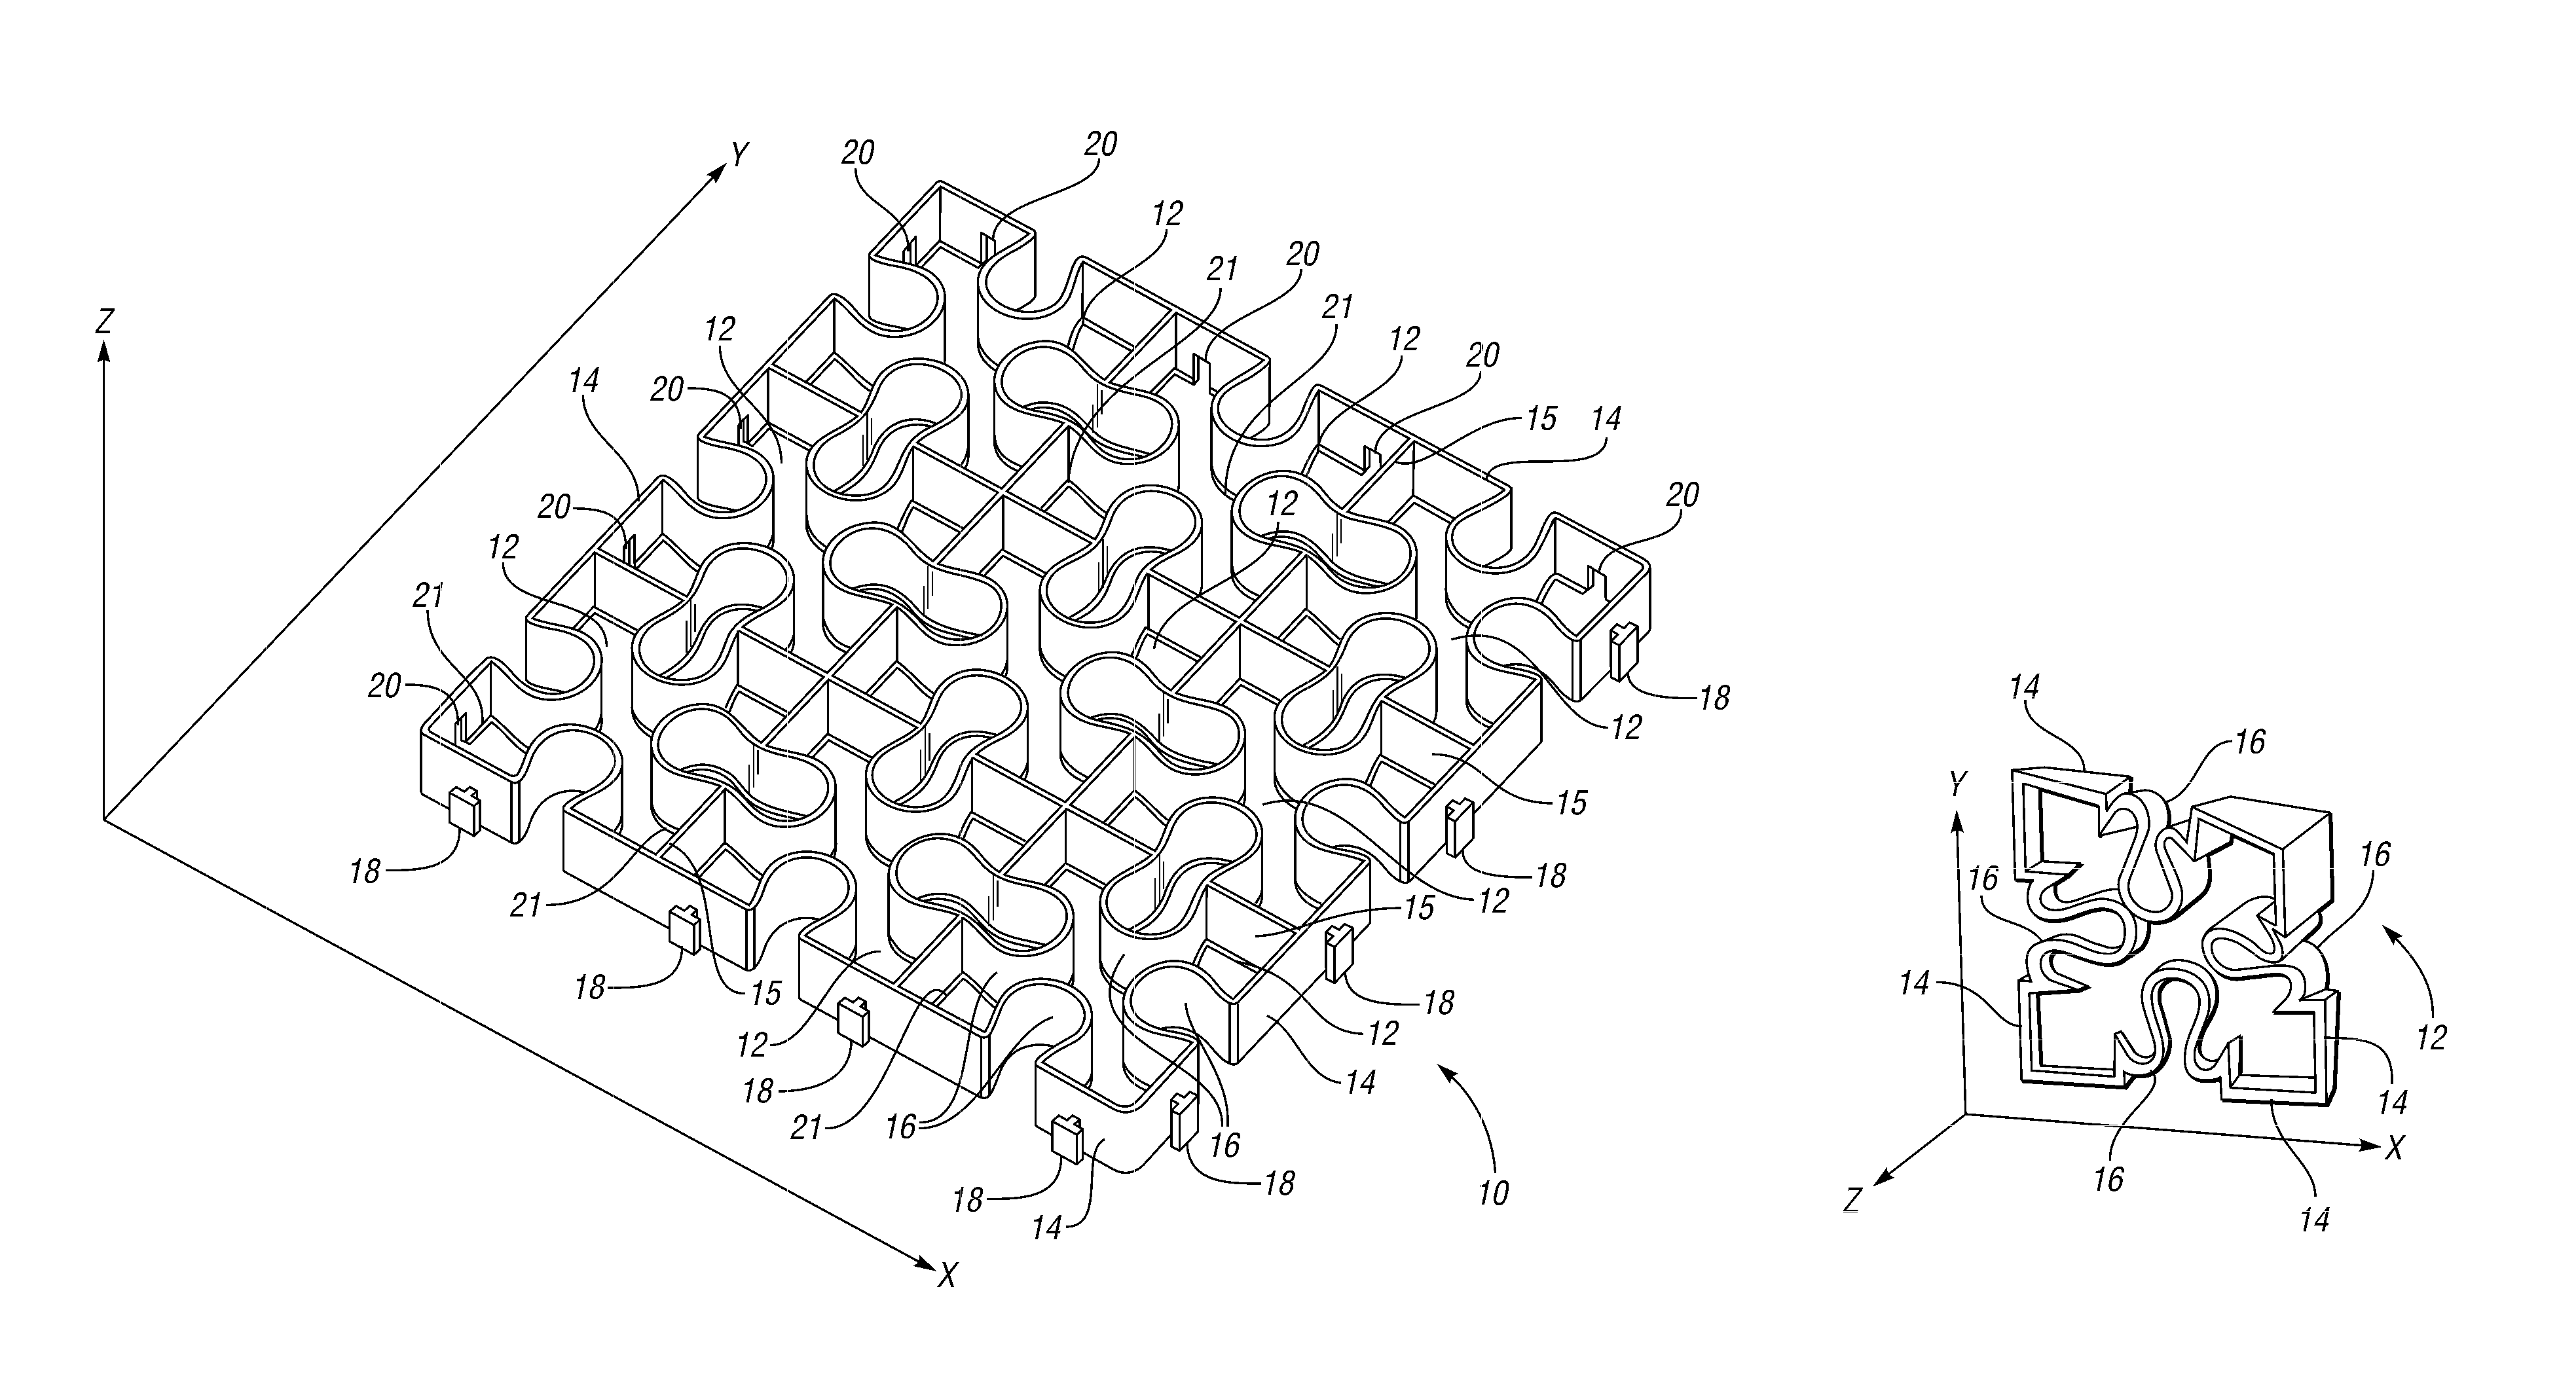 Continuous flexible support structure assembly